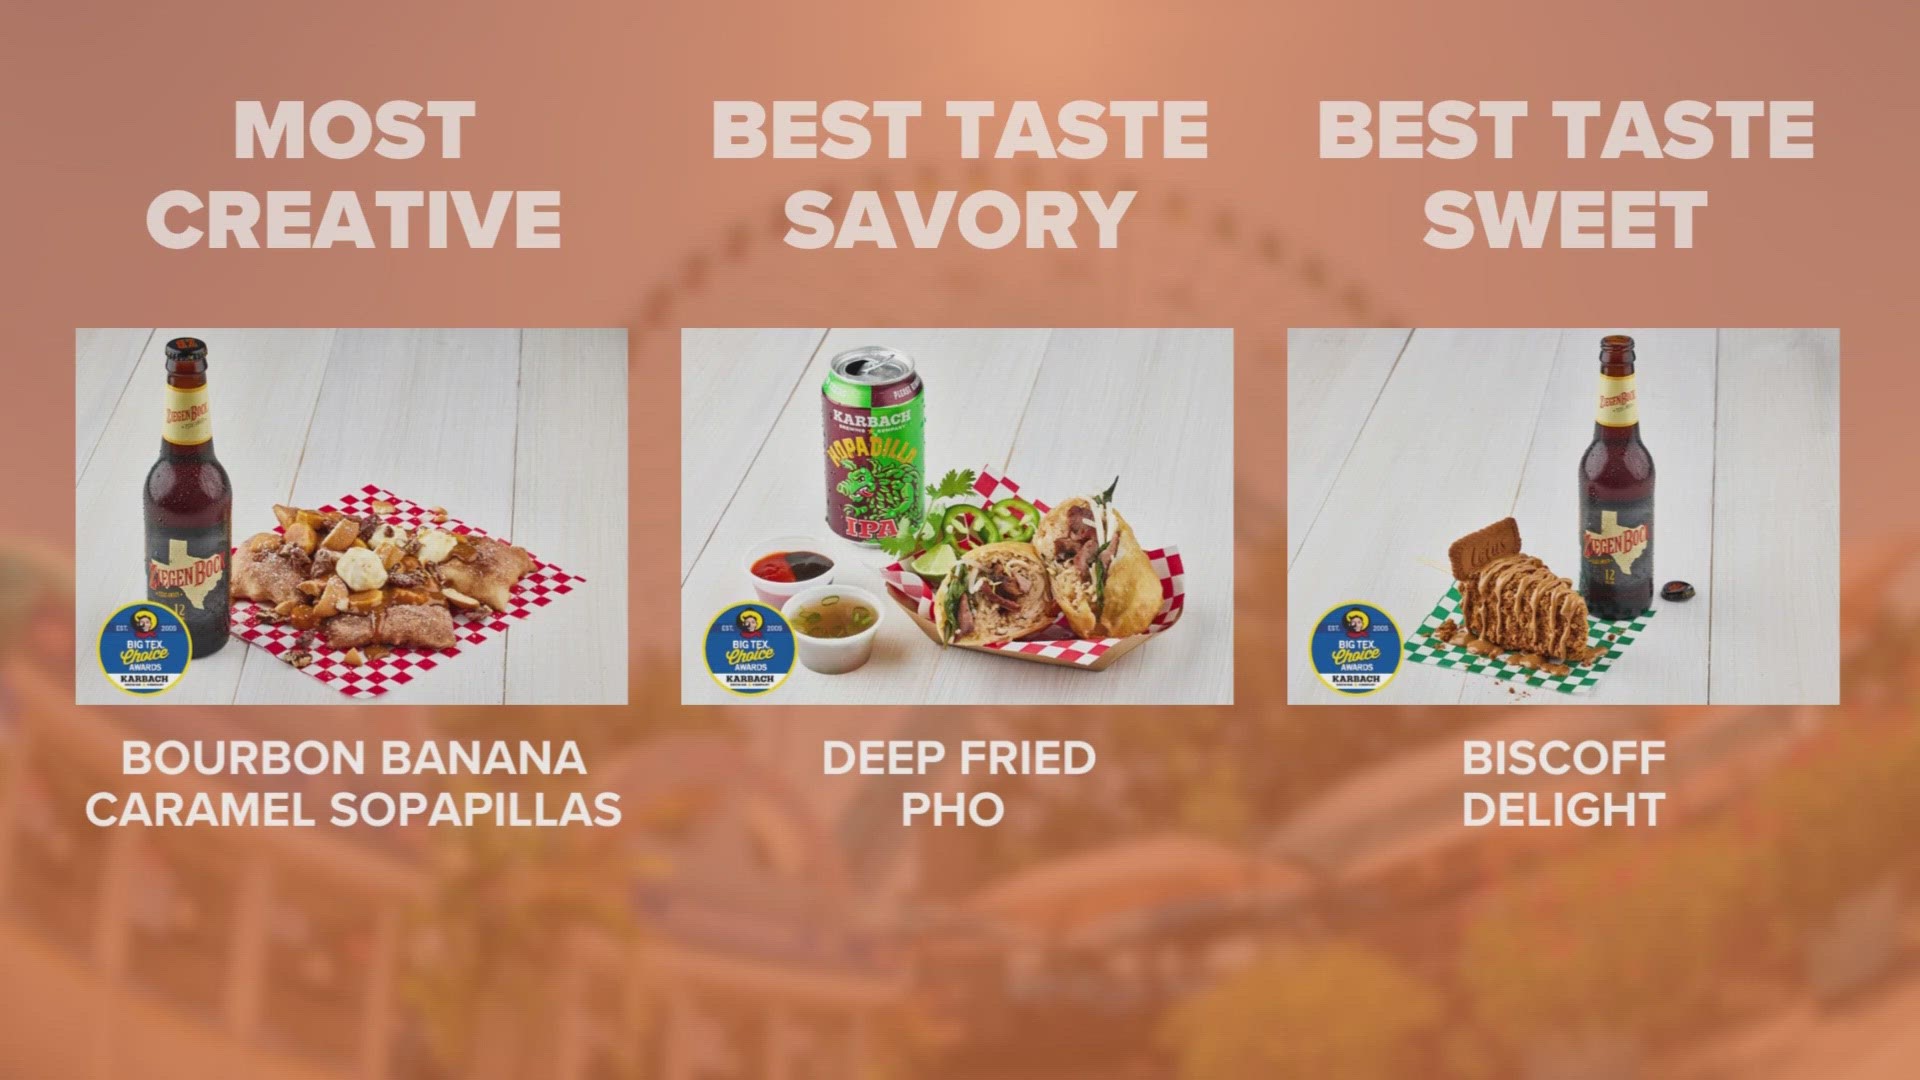 The awards were for most creative new food, best taste - savory, and best taste - sweet.